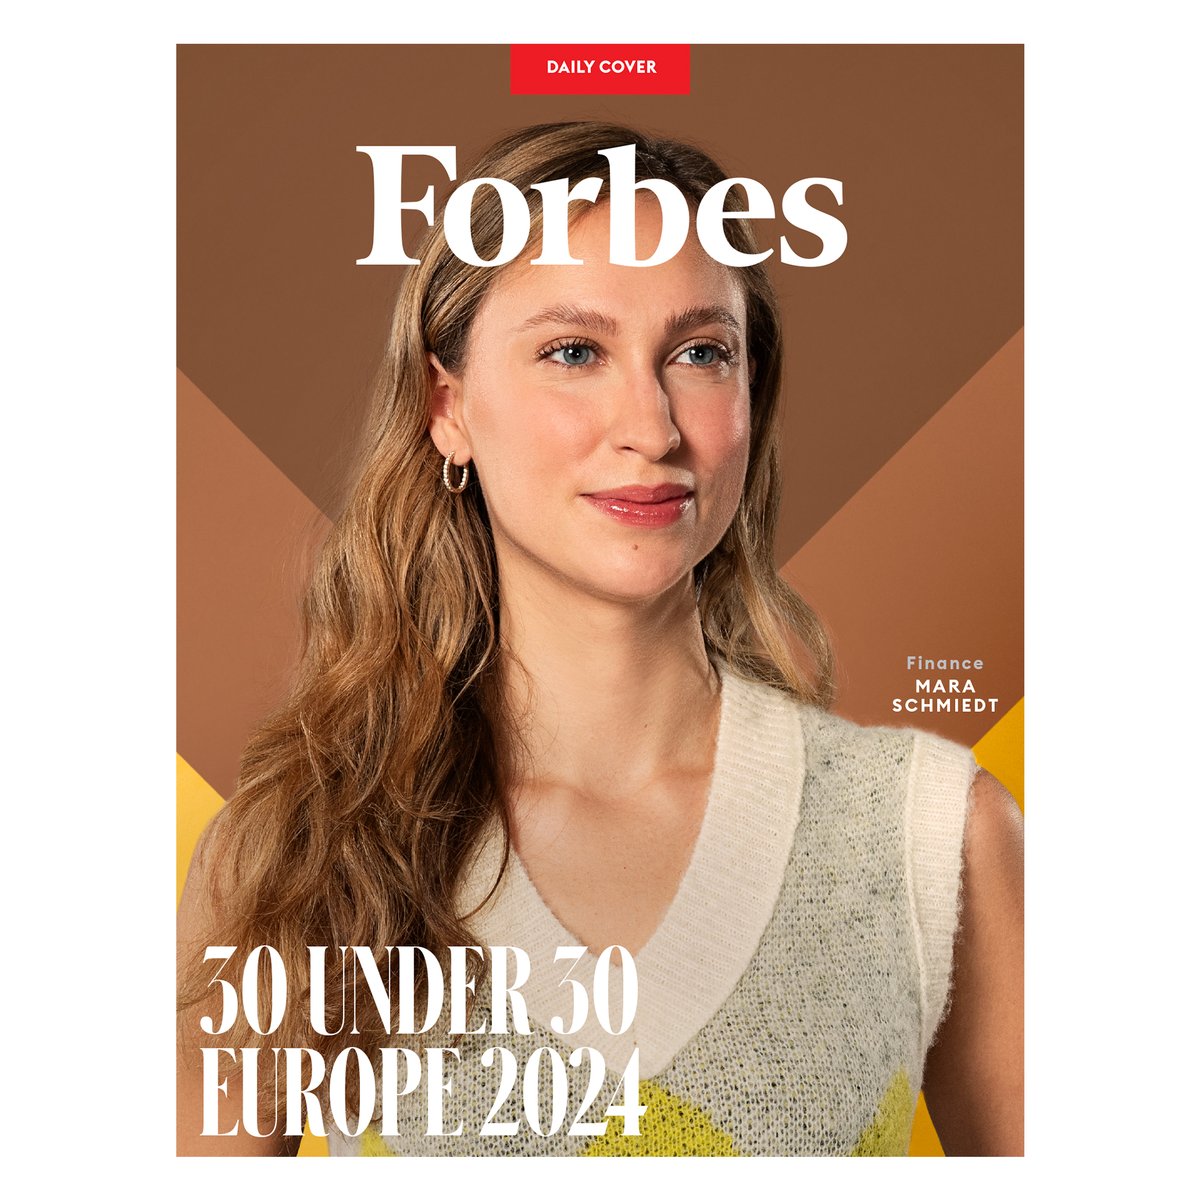 Mara Schmiedt, cofounder of Alluvial, is building a more secure future for crypto users by bringing competitors together. #ForbesUnder30 Europe: Finance trib.al/Vvlk14h